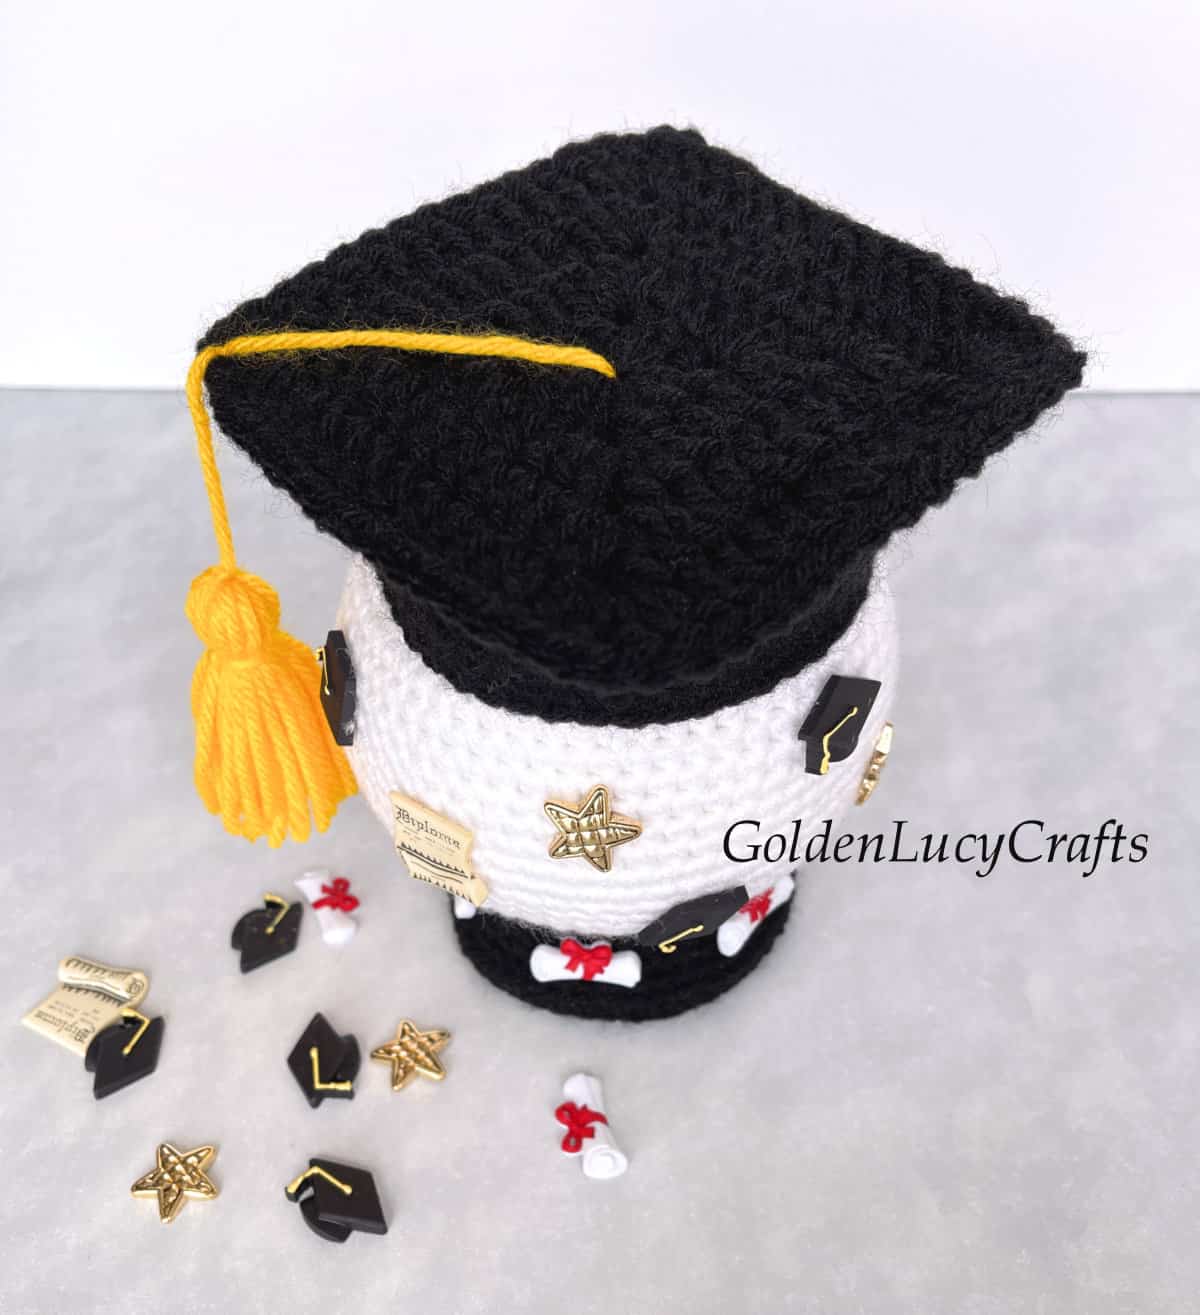 Crochet graduation snow globe - view from the above.